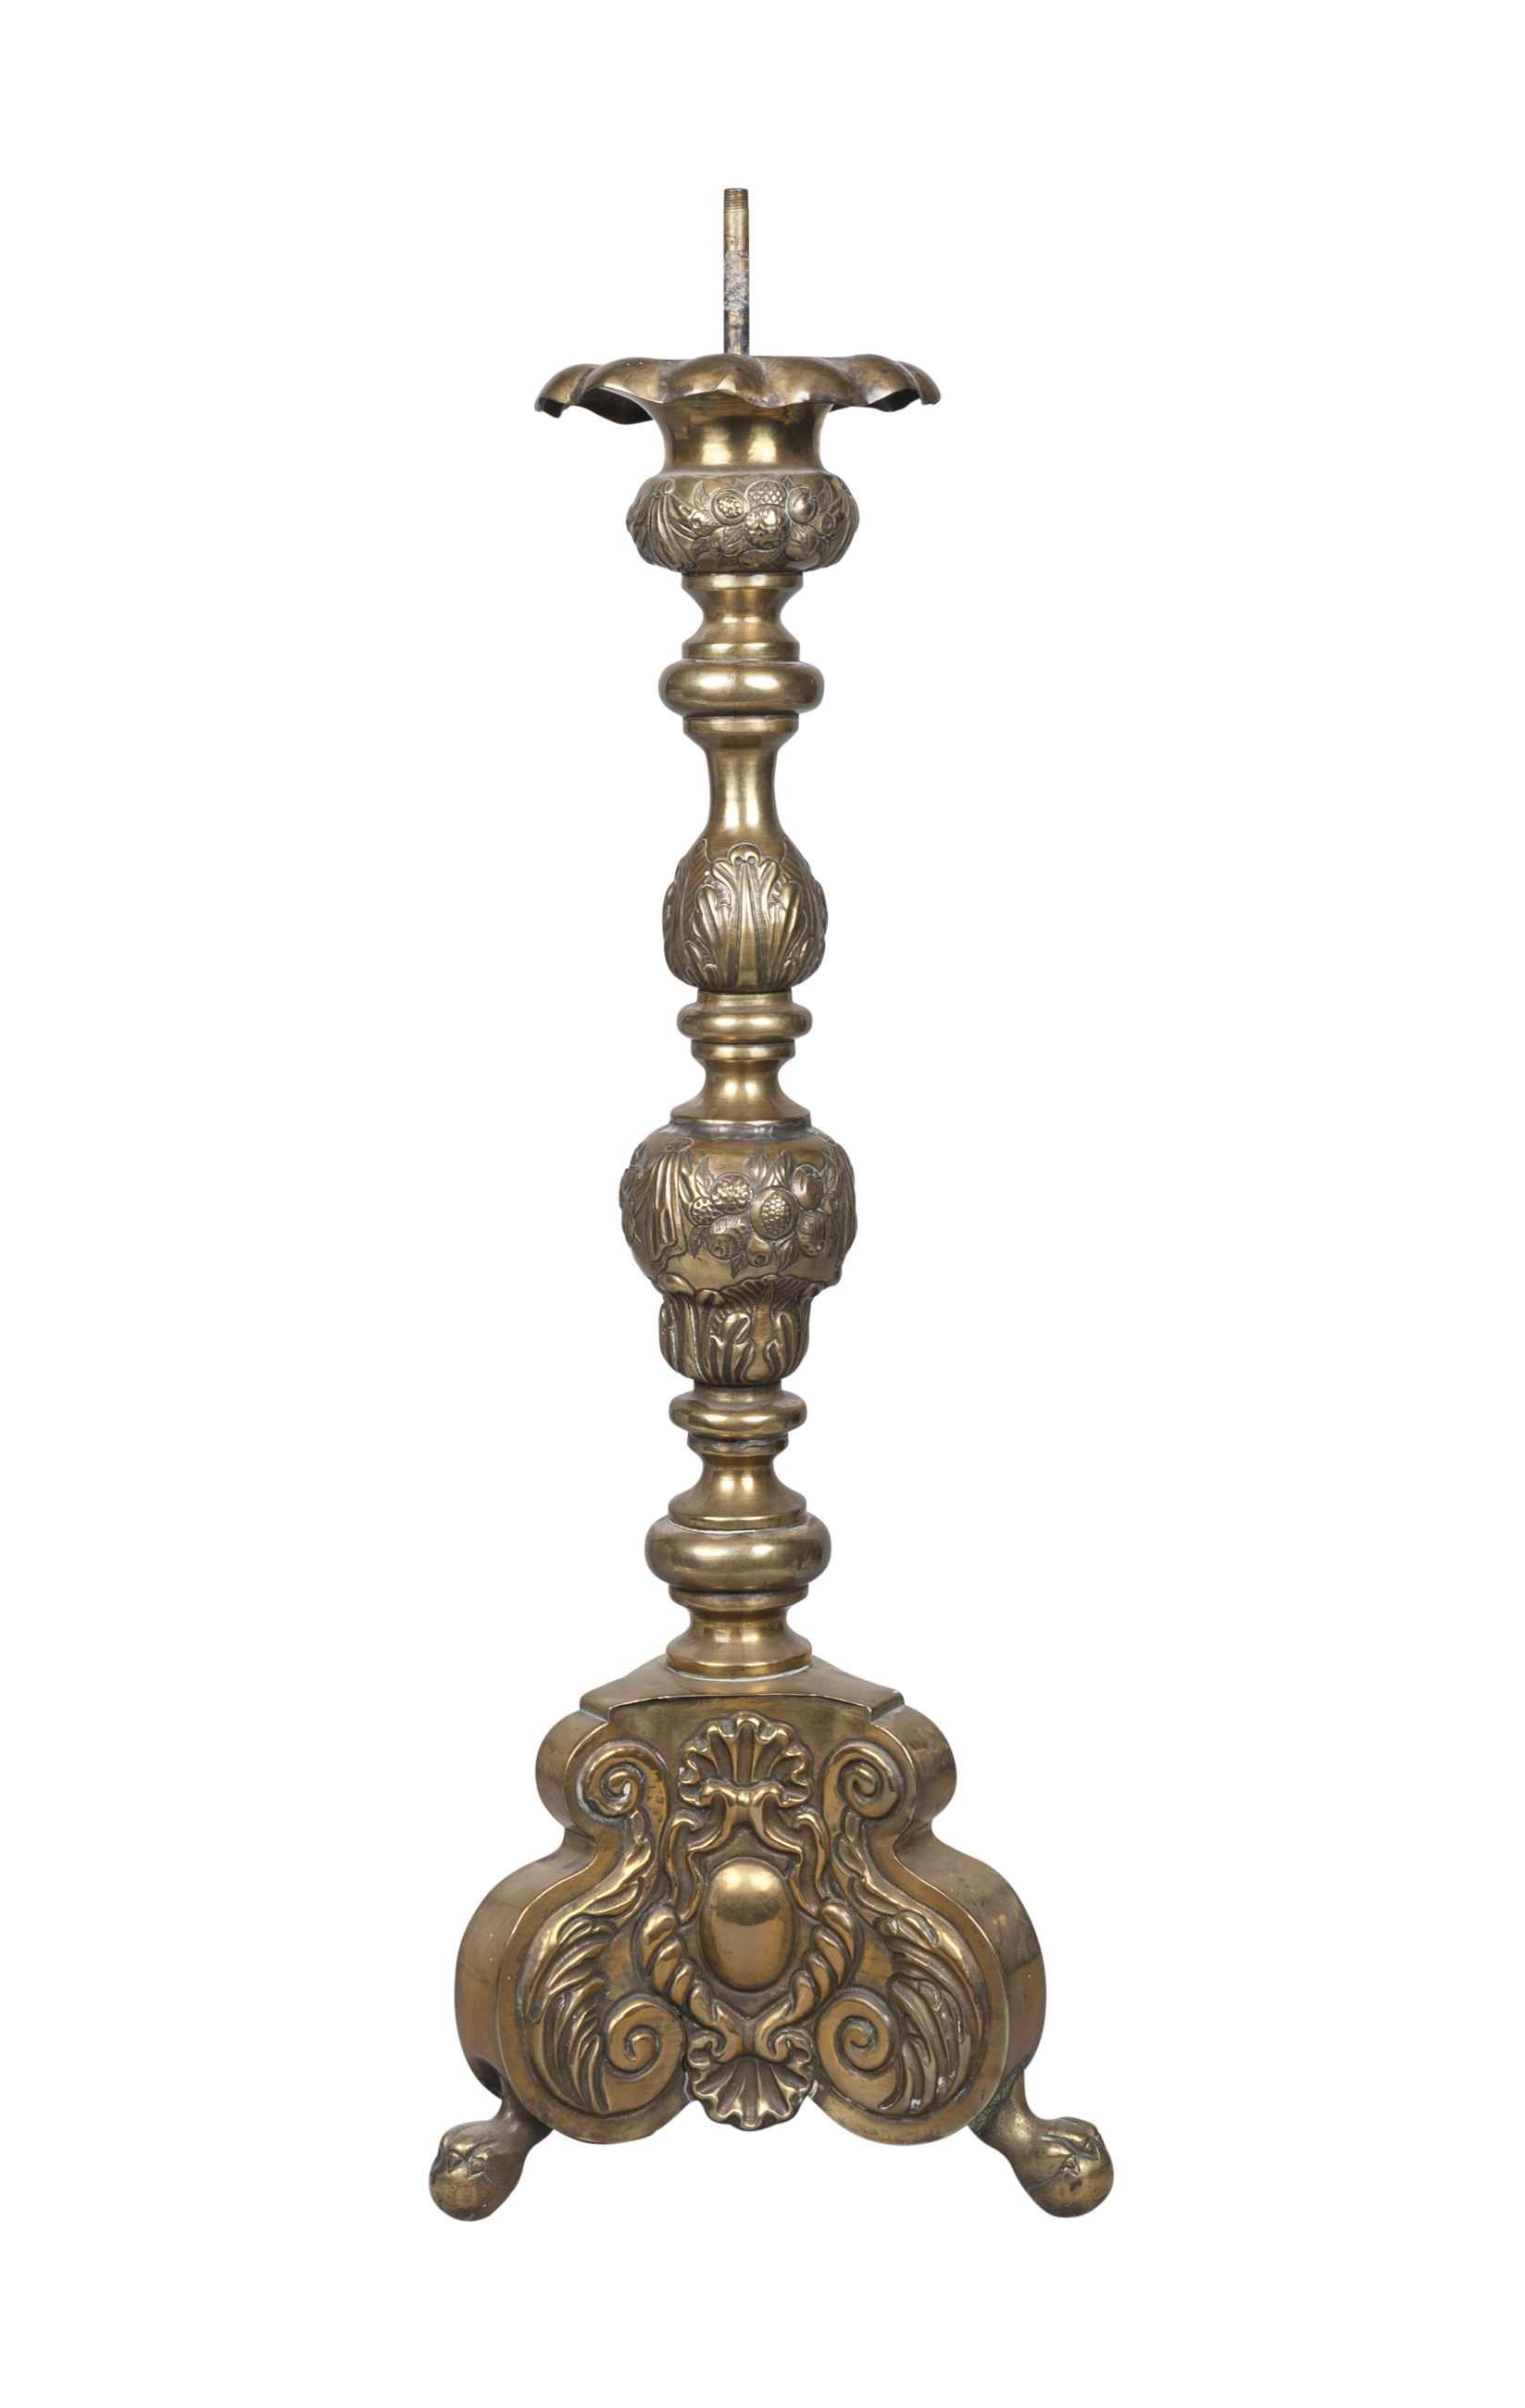 A Continental brass pricket stick, probably Spanish, late 19th century, embossed with flowers and